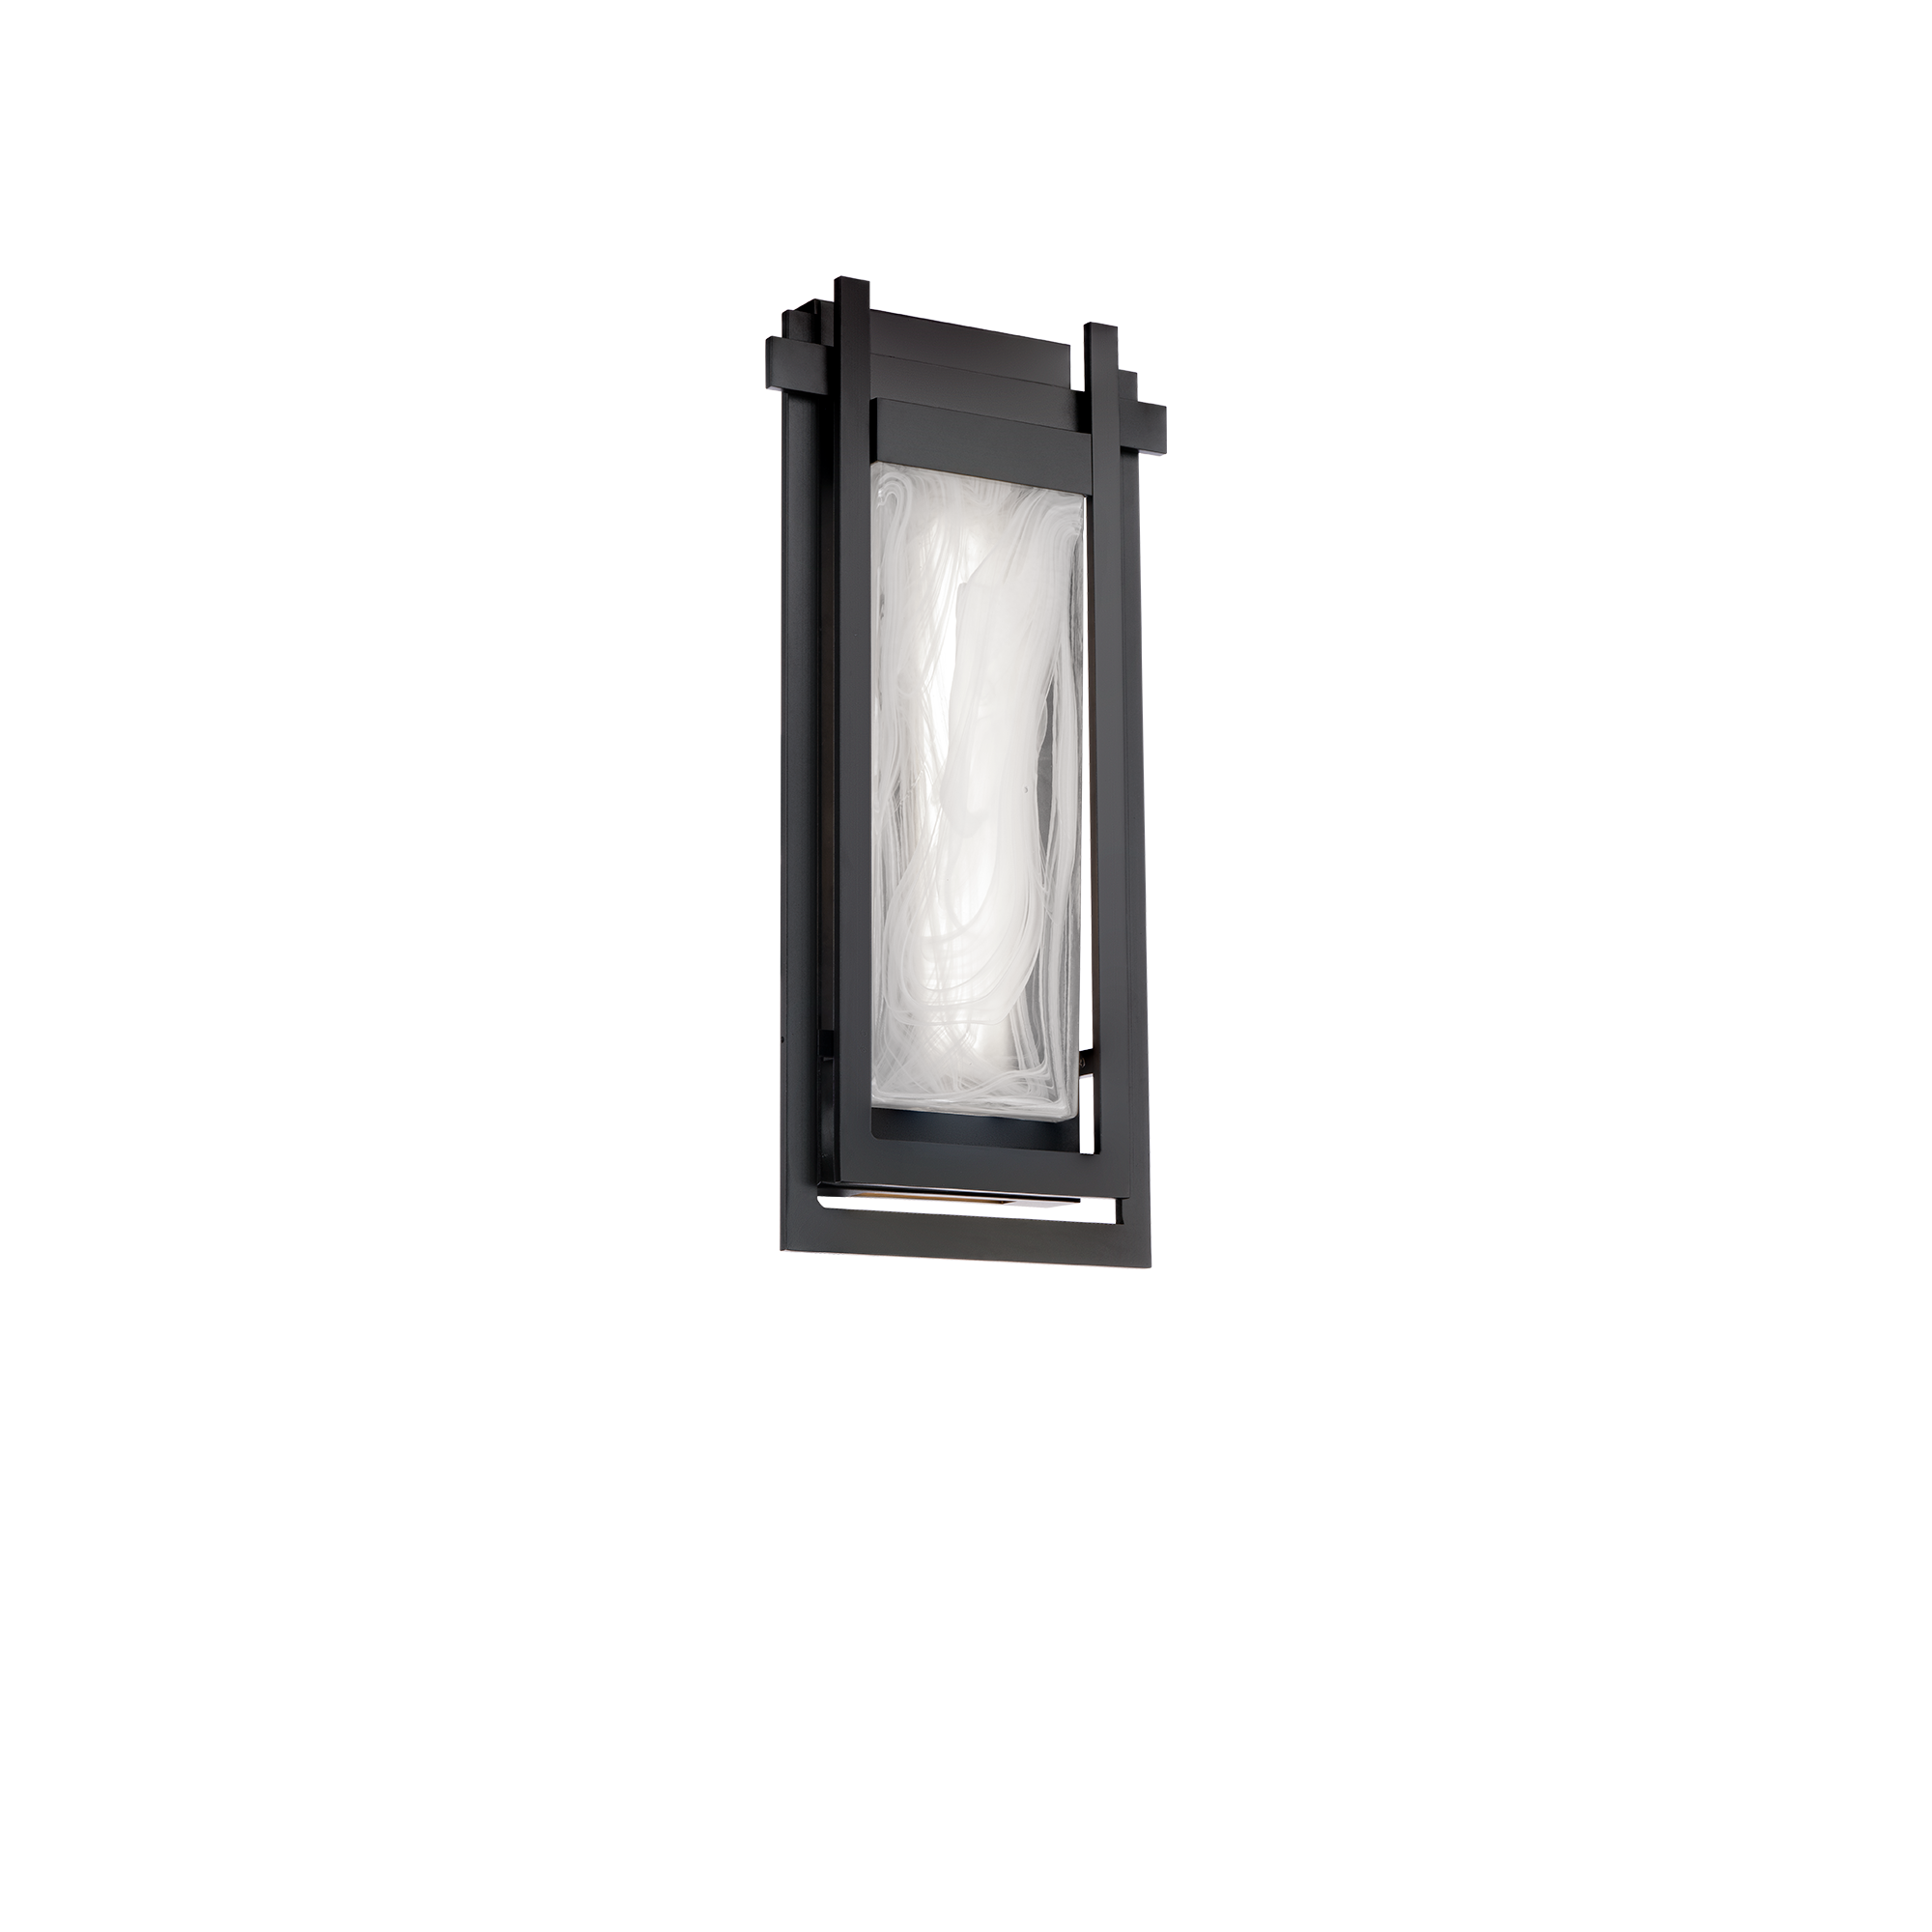 AEGIS Outdoor wall sconce Black INTEGRATED LED - WS-W64316-BK | MODERN FORMS